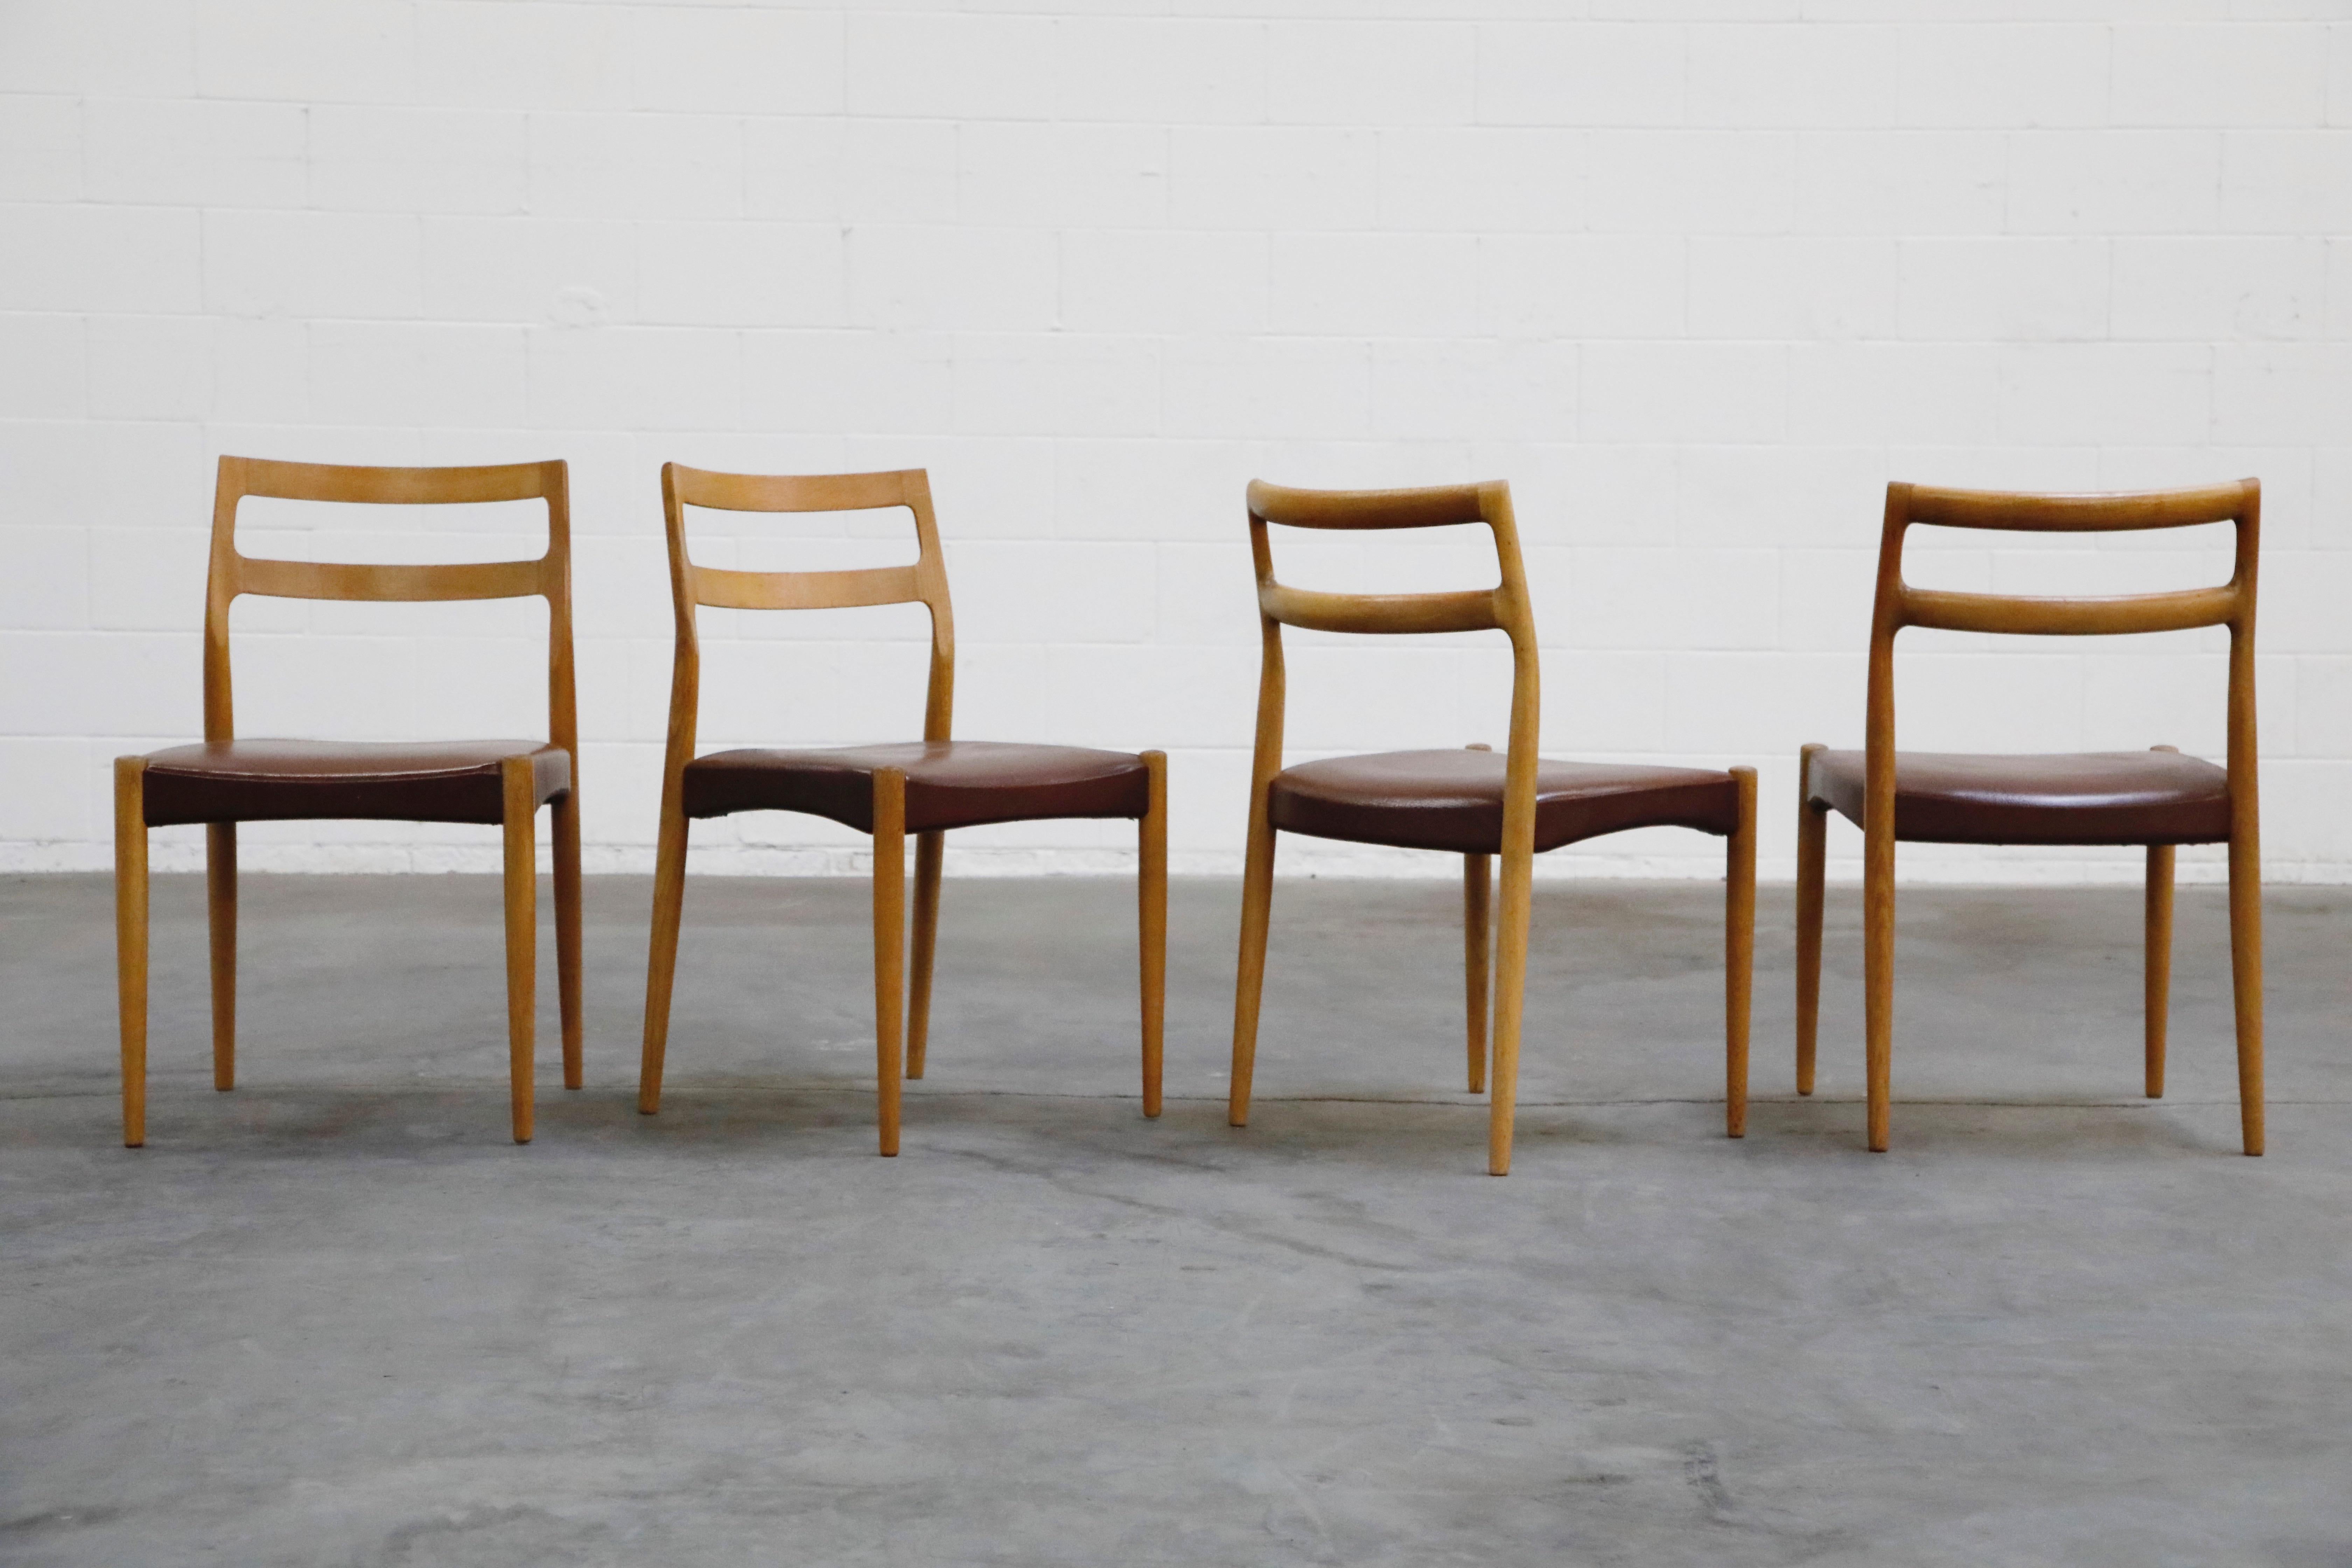 This lovely set of four (4) Danish Modern dining chairs are by Johannes Andersen for Uldum Møbelfabrik, sculpted from oak with leatherette upholstery, and in the style of Niels Otto Moller, these are a perfect option for interior designers and